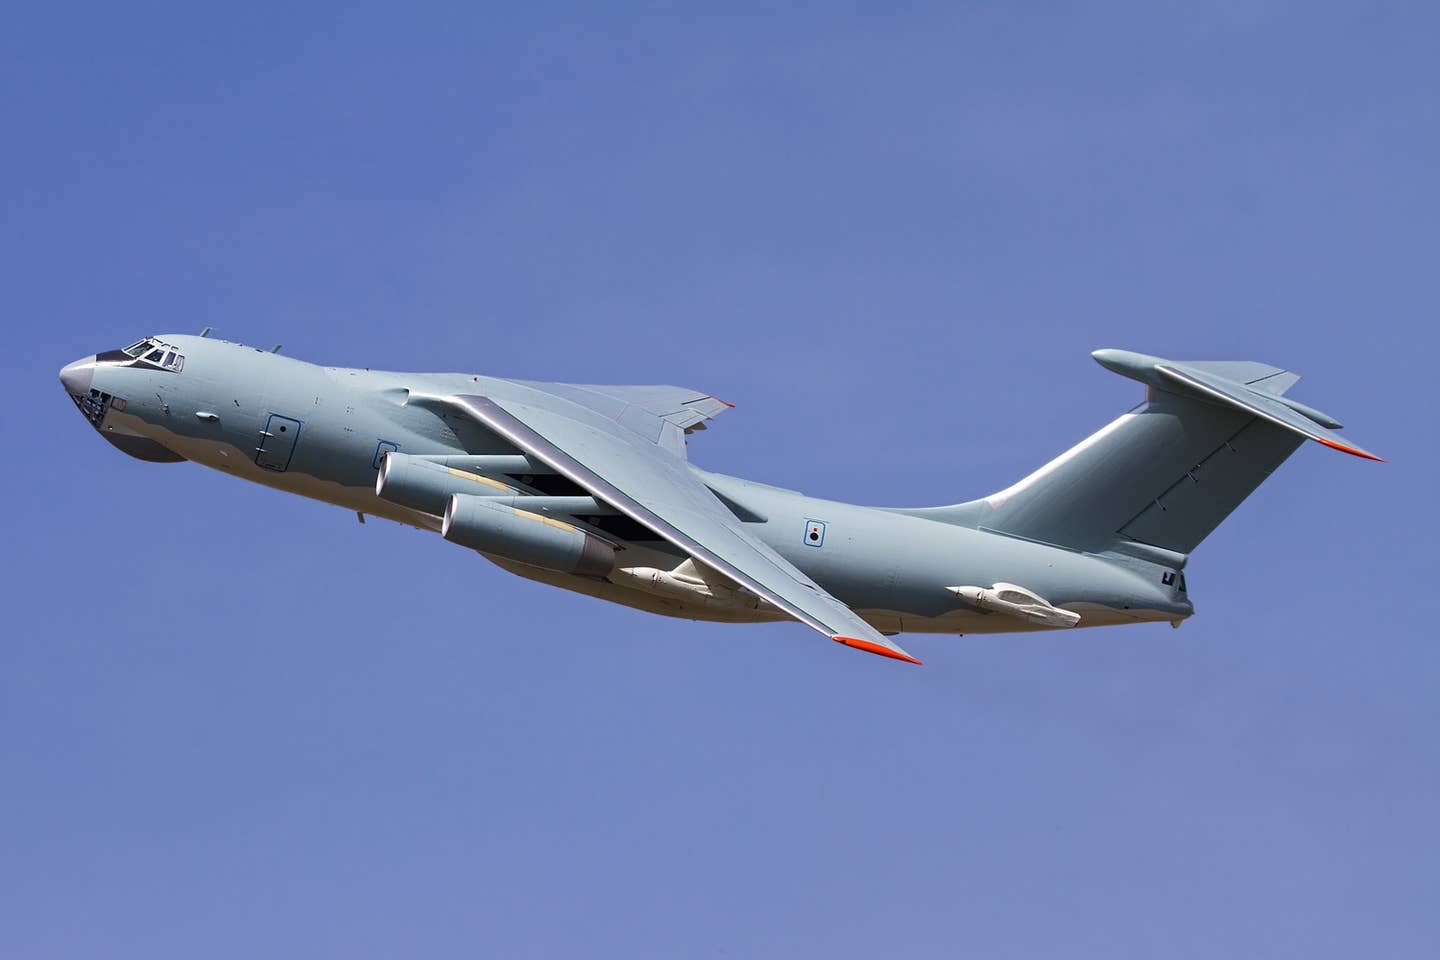 One of the PLAAF’s small fleet of Il-78 tankers, which were acquired second-hand. <em>Andrey Rakul/Wikimedia Commons</em>